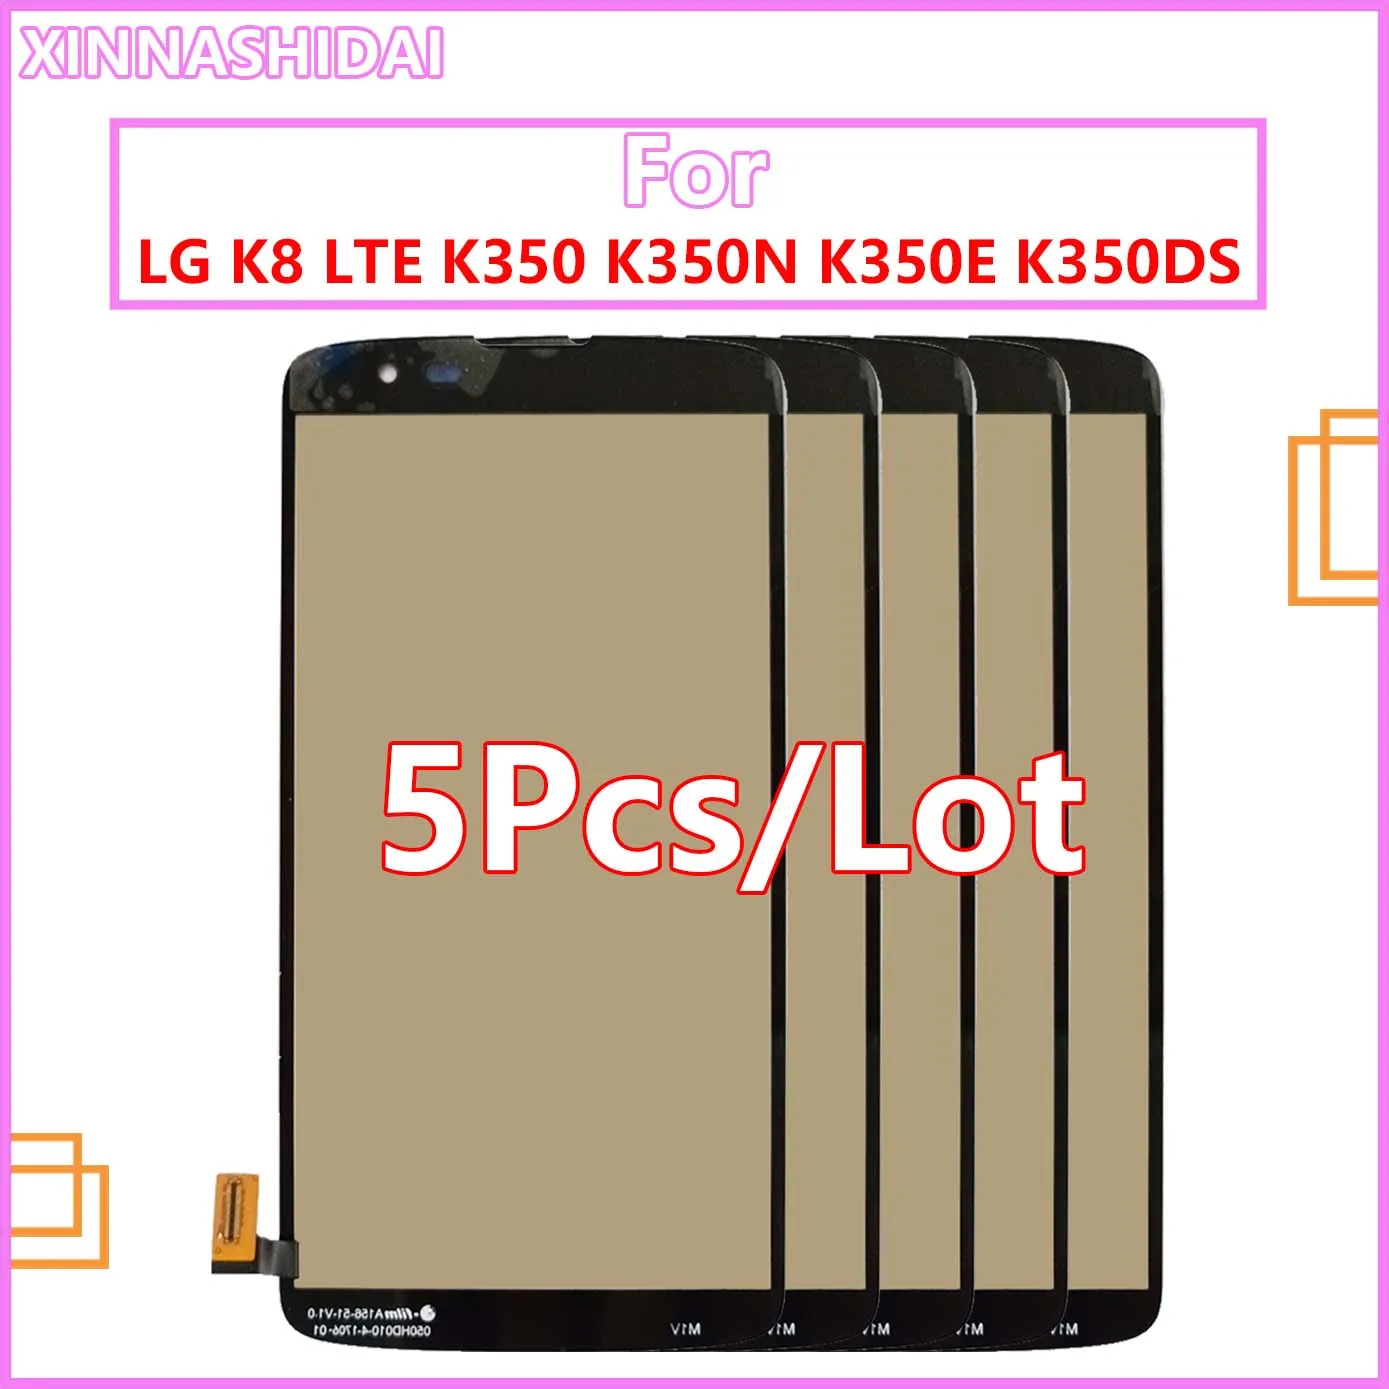 

5PCS/For LG K8 2017 Aristo M200N M210 MS210 US215 M200 M200E LCD Display Touch Screen Digitizer Assembly With/No Frame 5.0"